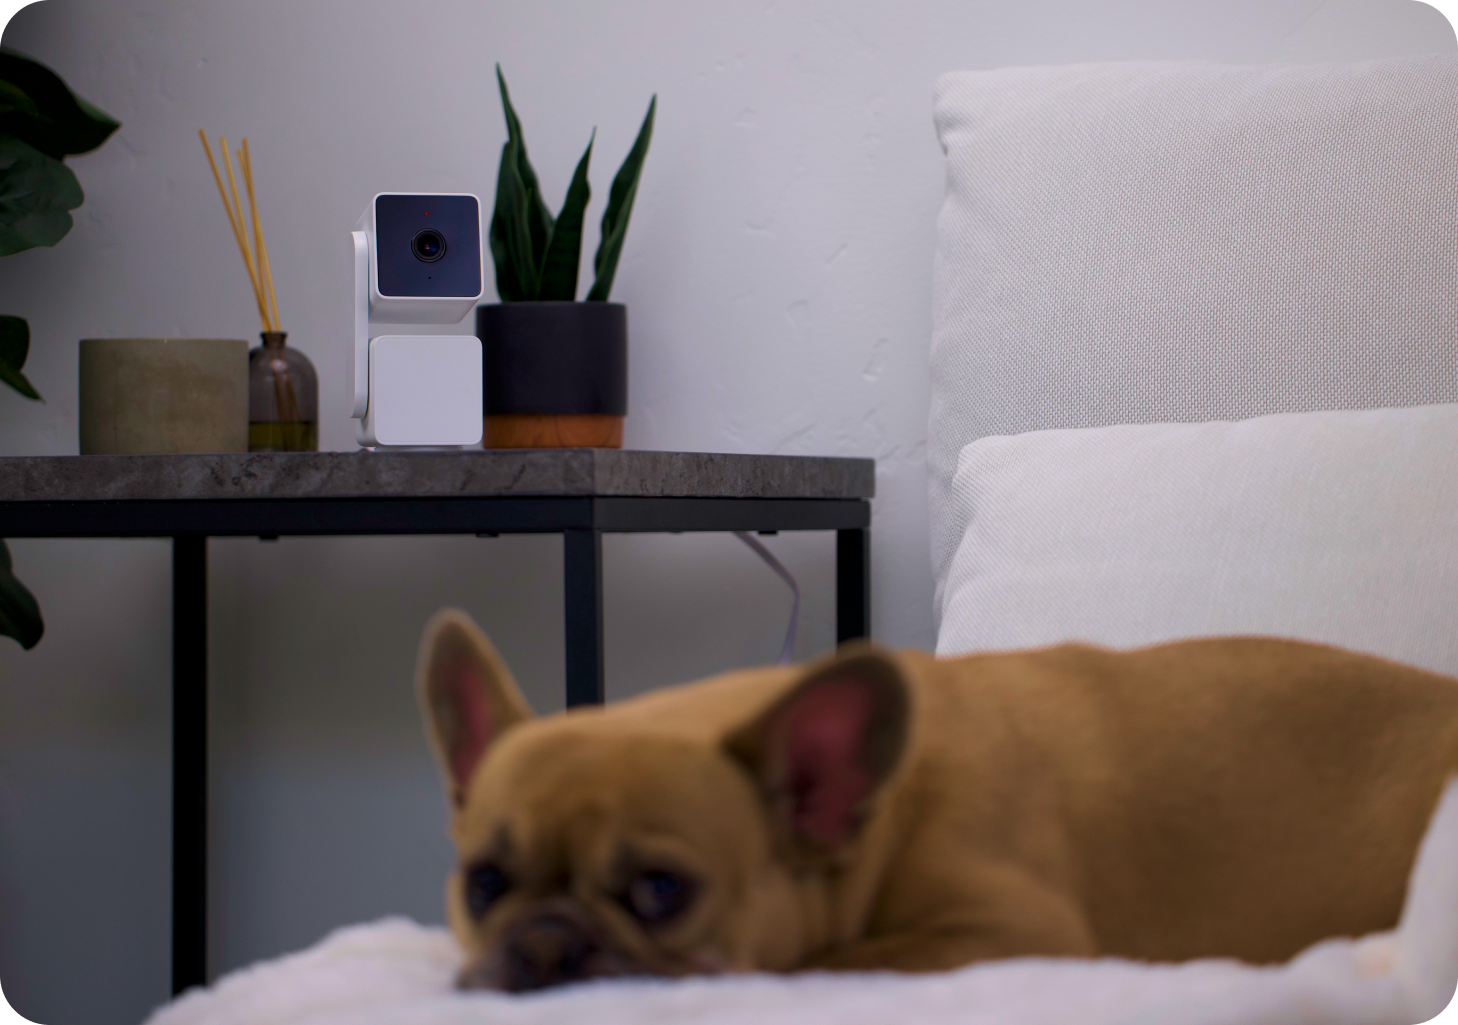 Dog laying on bed being monitored by Cam Pan v3 on nightstand 